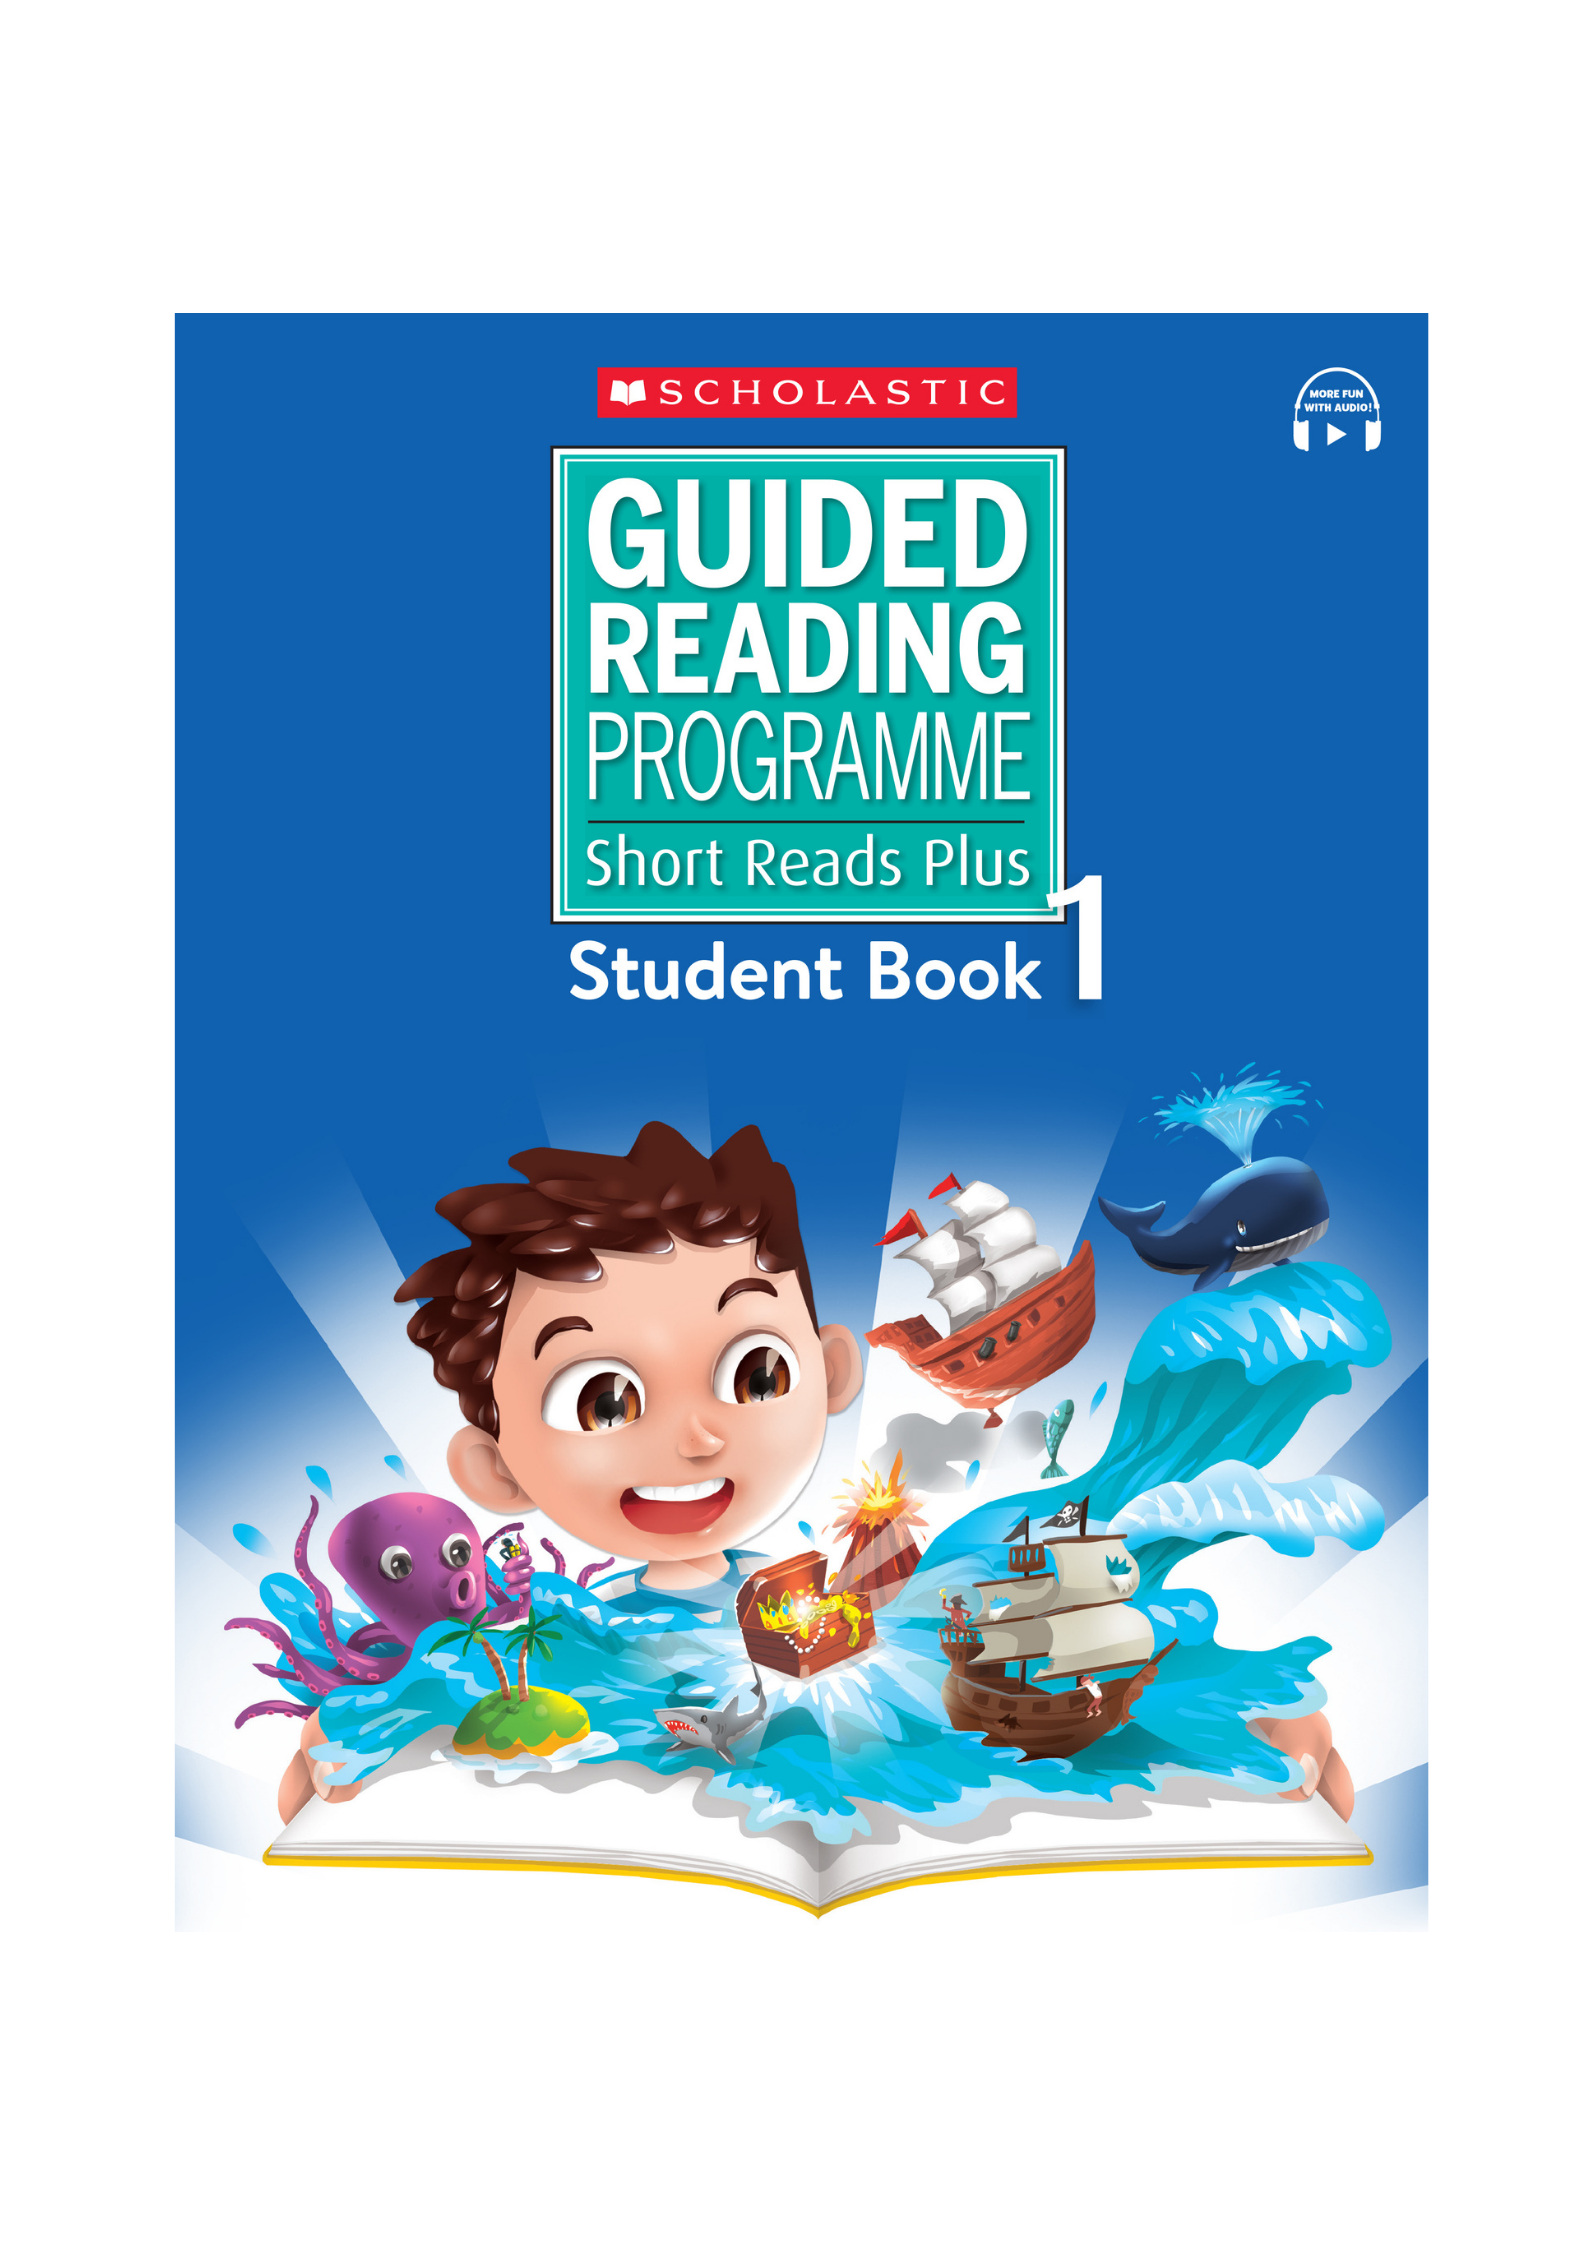 Guided Reading Short Reads Plus Student Book – Level 1 (Asia)